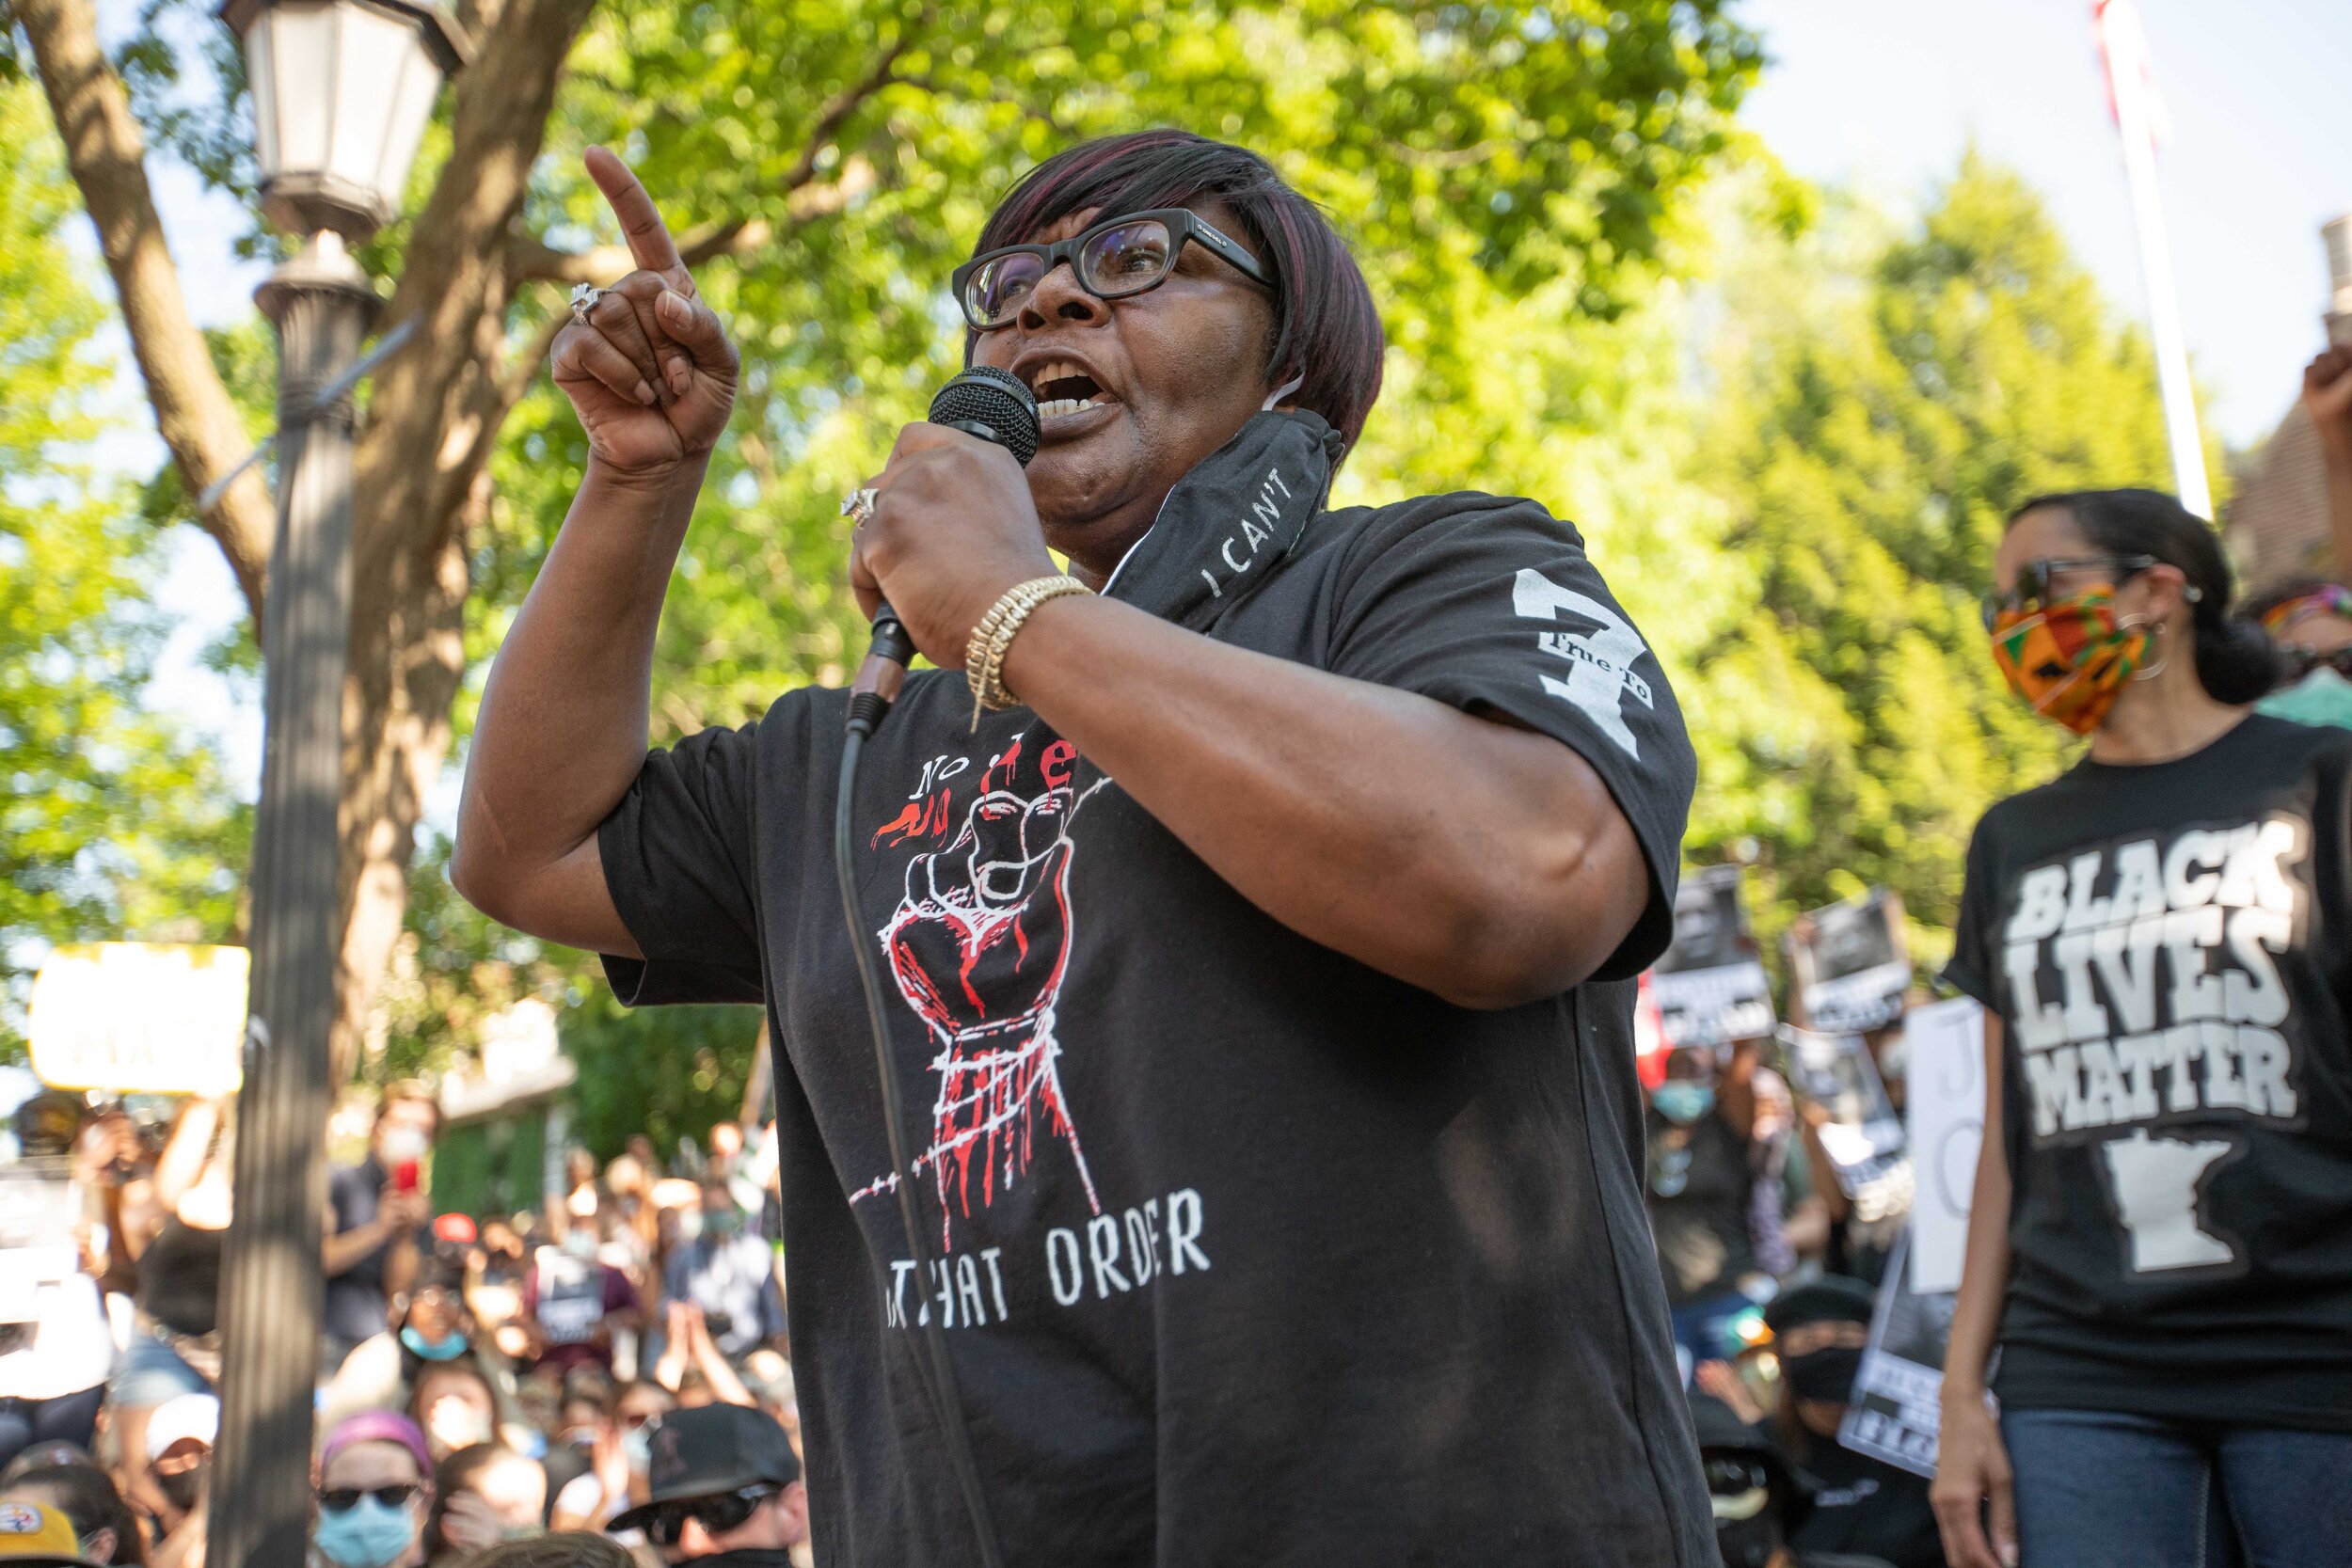  Kimberly, Handy-Jones, the mother of Cordale Handy speaks to the crowd of proetsters in front of the Governors Mansion in Saint Paul, Minnesota on June 1, 2020. Chris Juhn/Zenger 